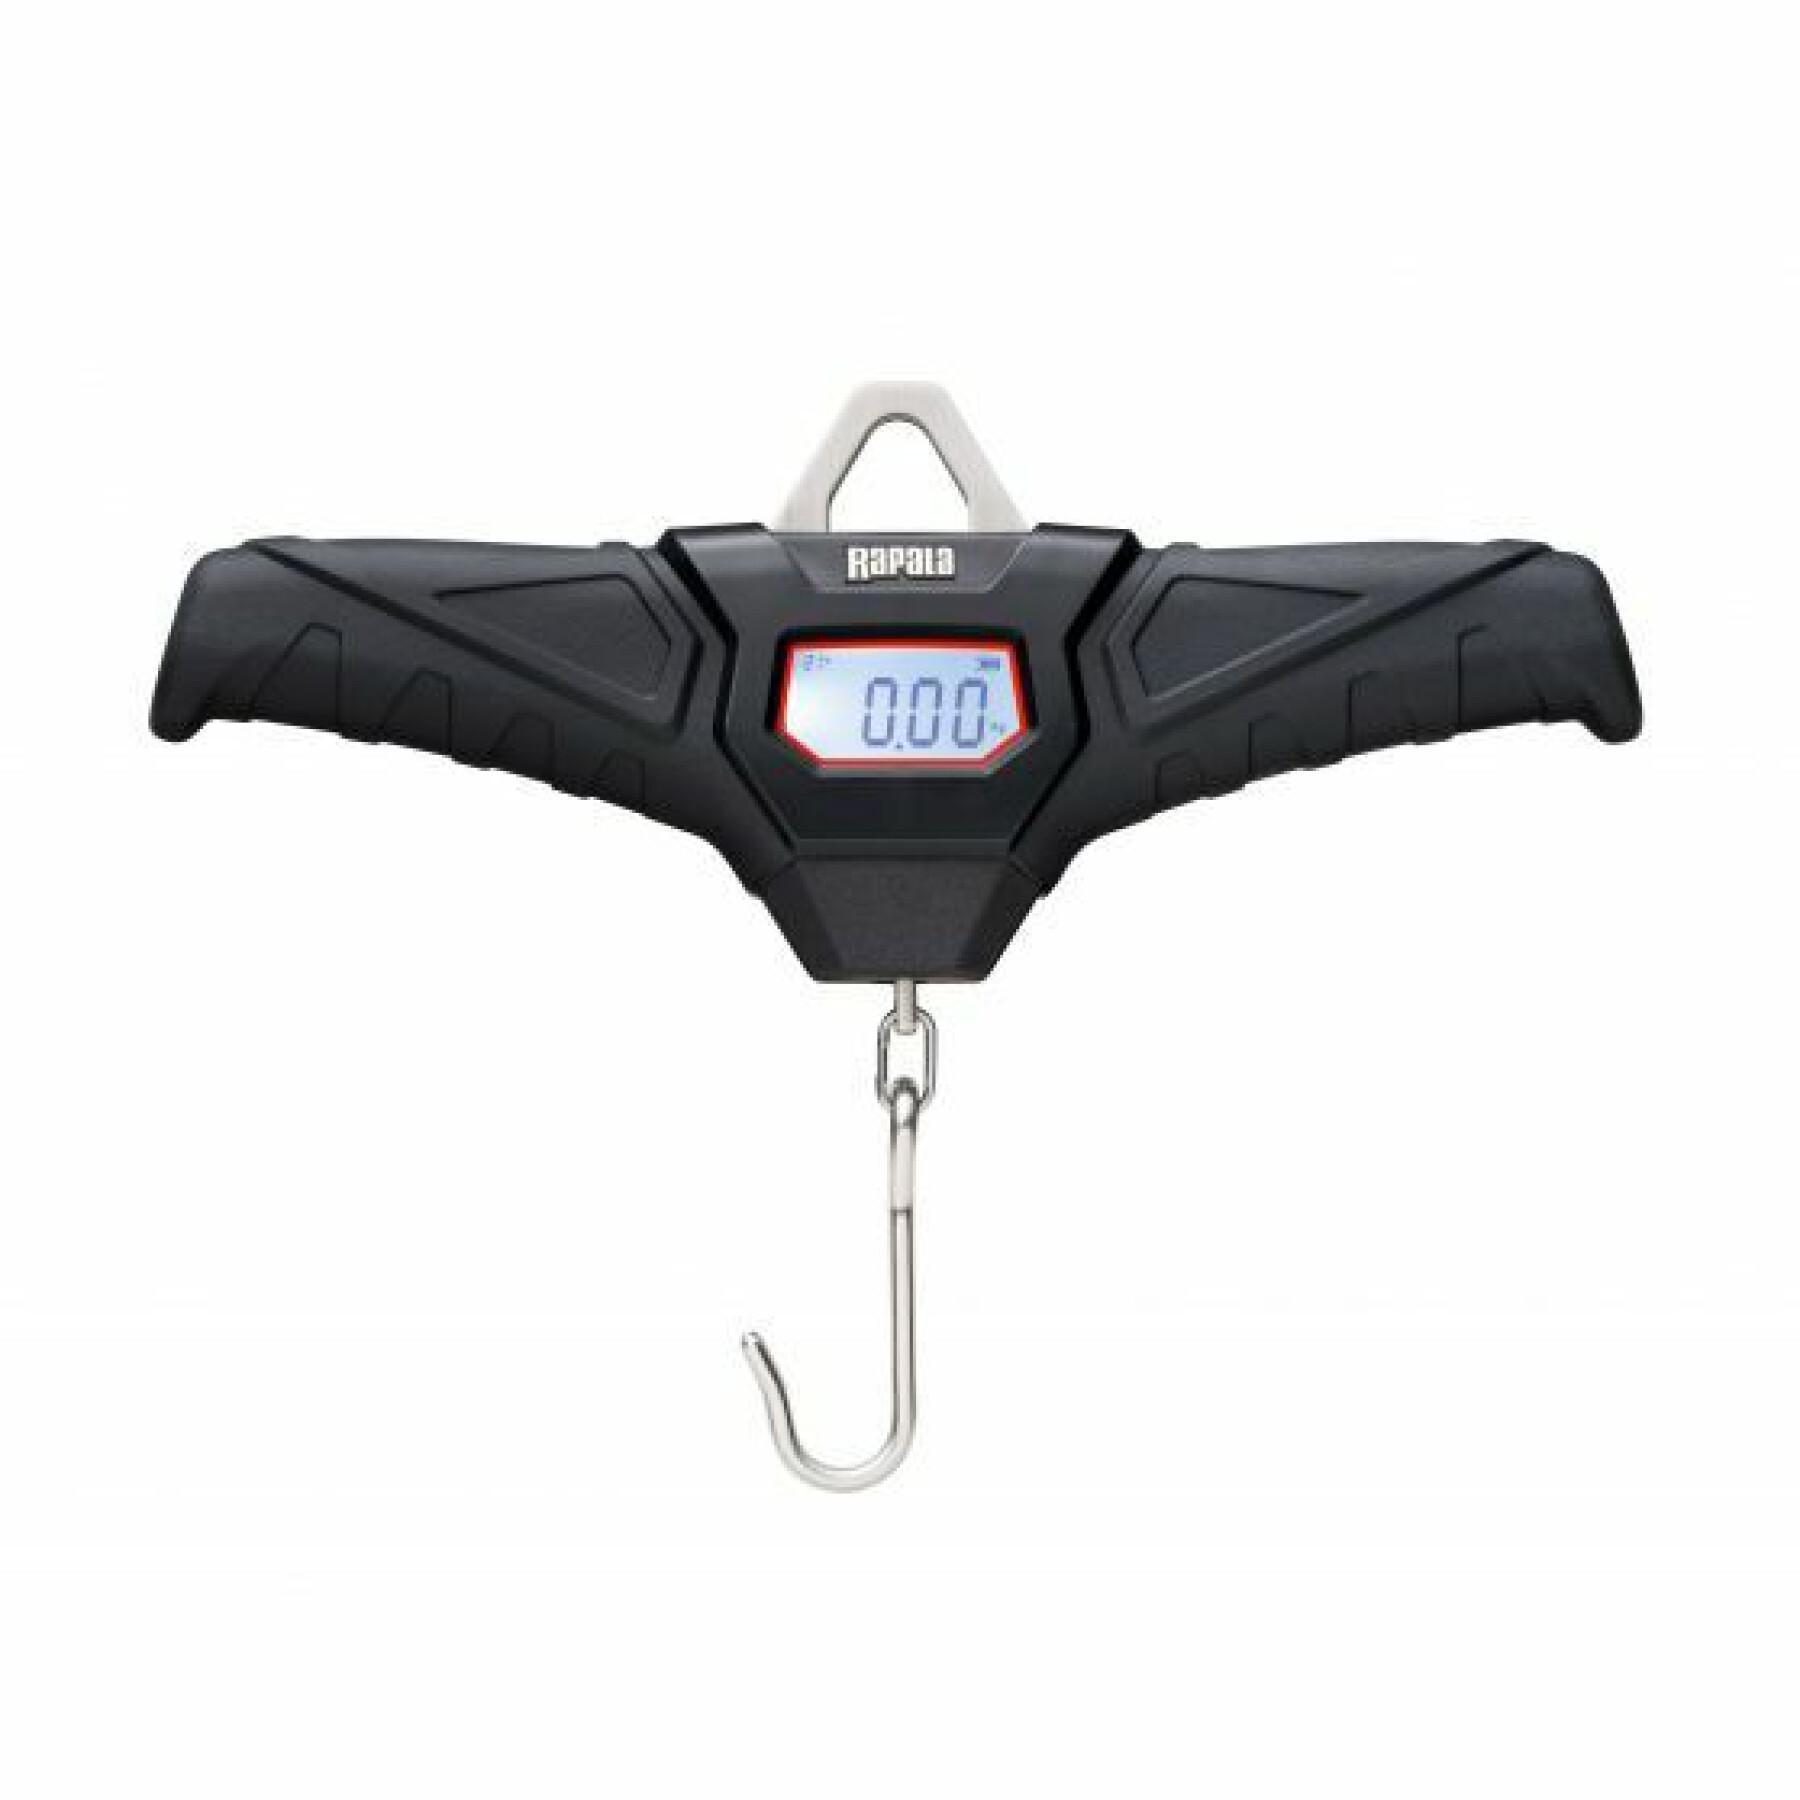 Lastcell Rapala rcd magnum 50kg scale